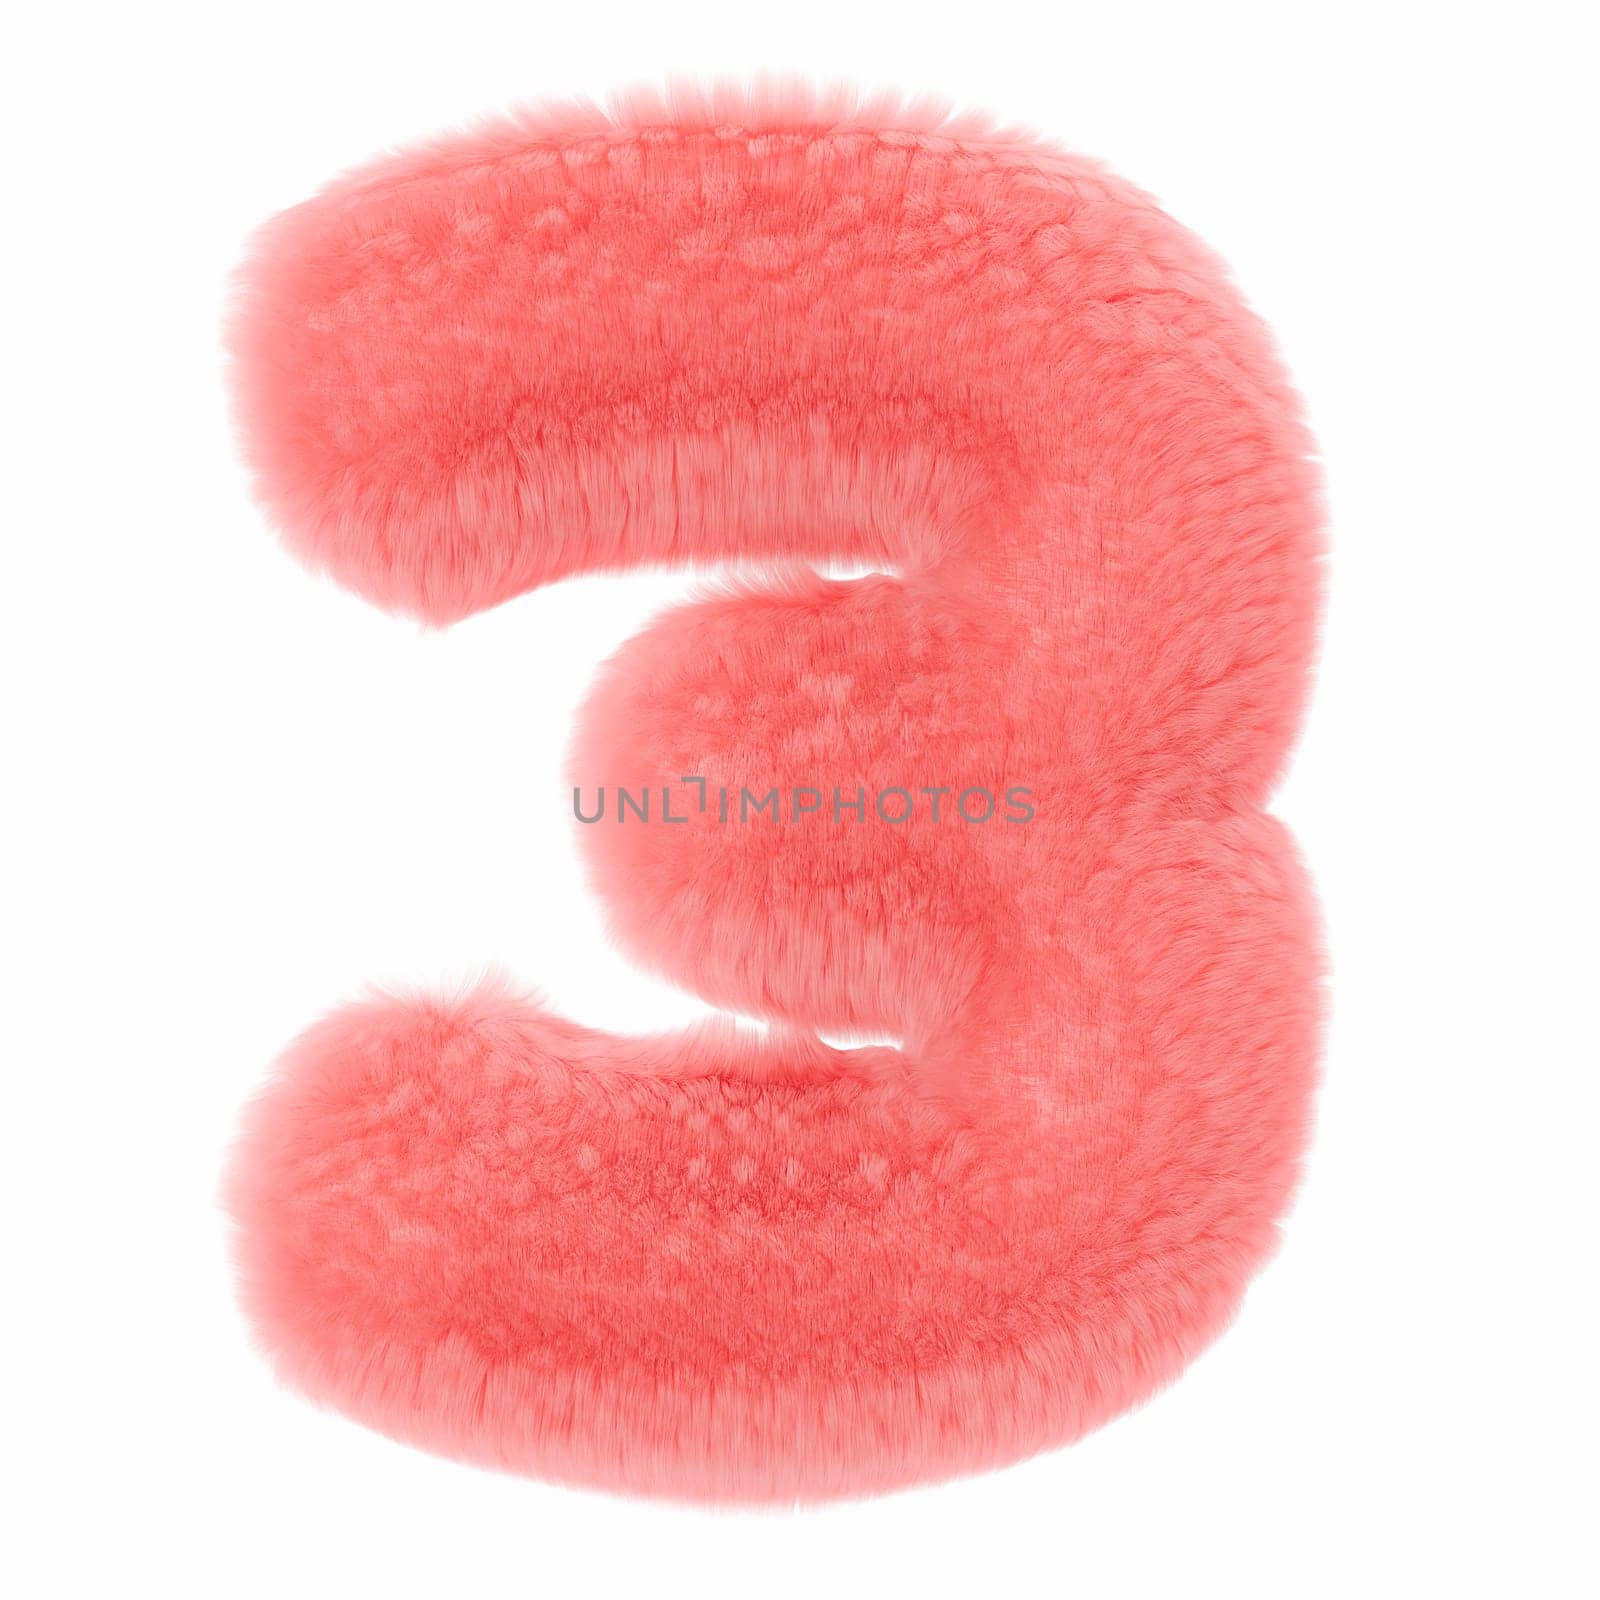 Pink and fluffy 3D number three, isolated on white background. Furry, soft and hairy symbol 3. Trendy, cute design element. Cut out object. 3D rendering. by creativebird